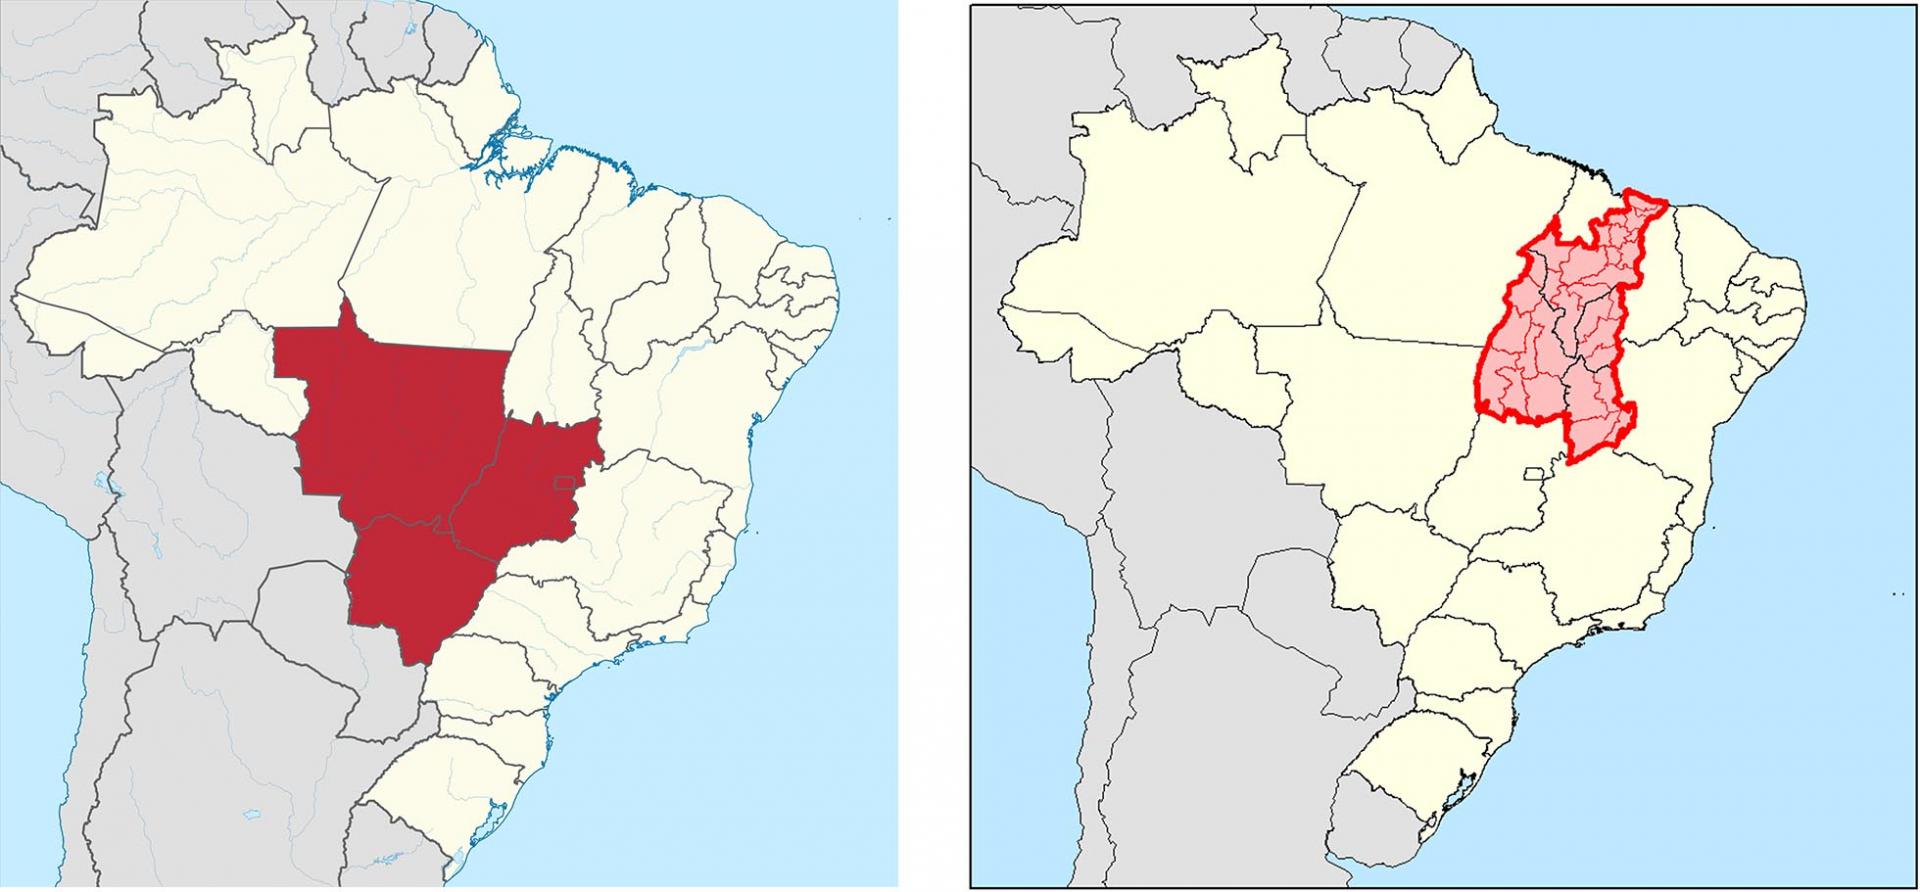 Maps depicting ag areas in Brazil 